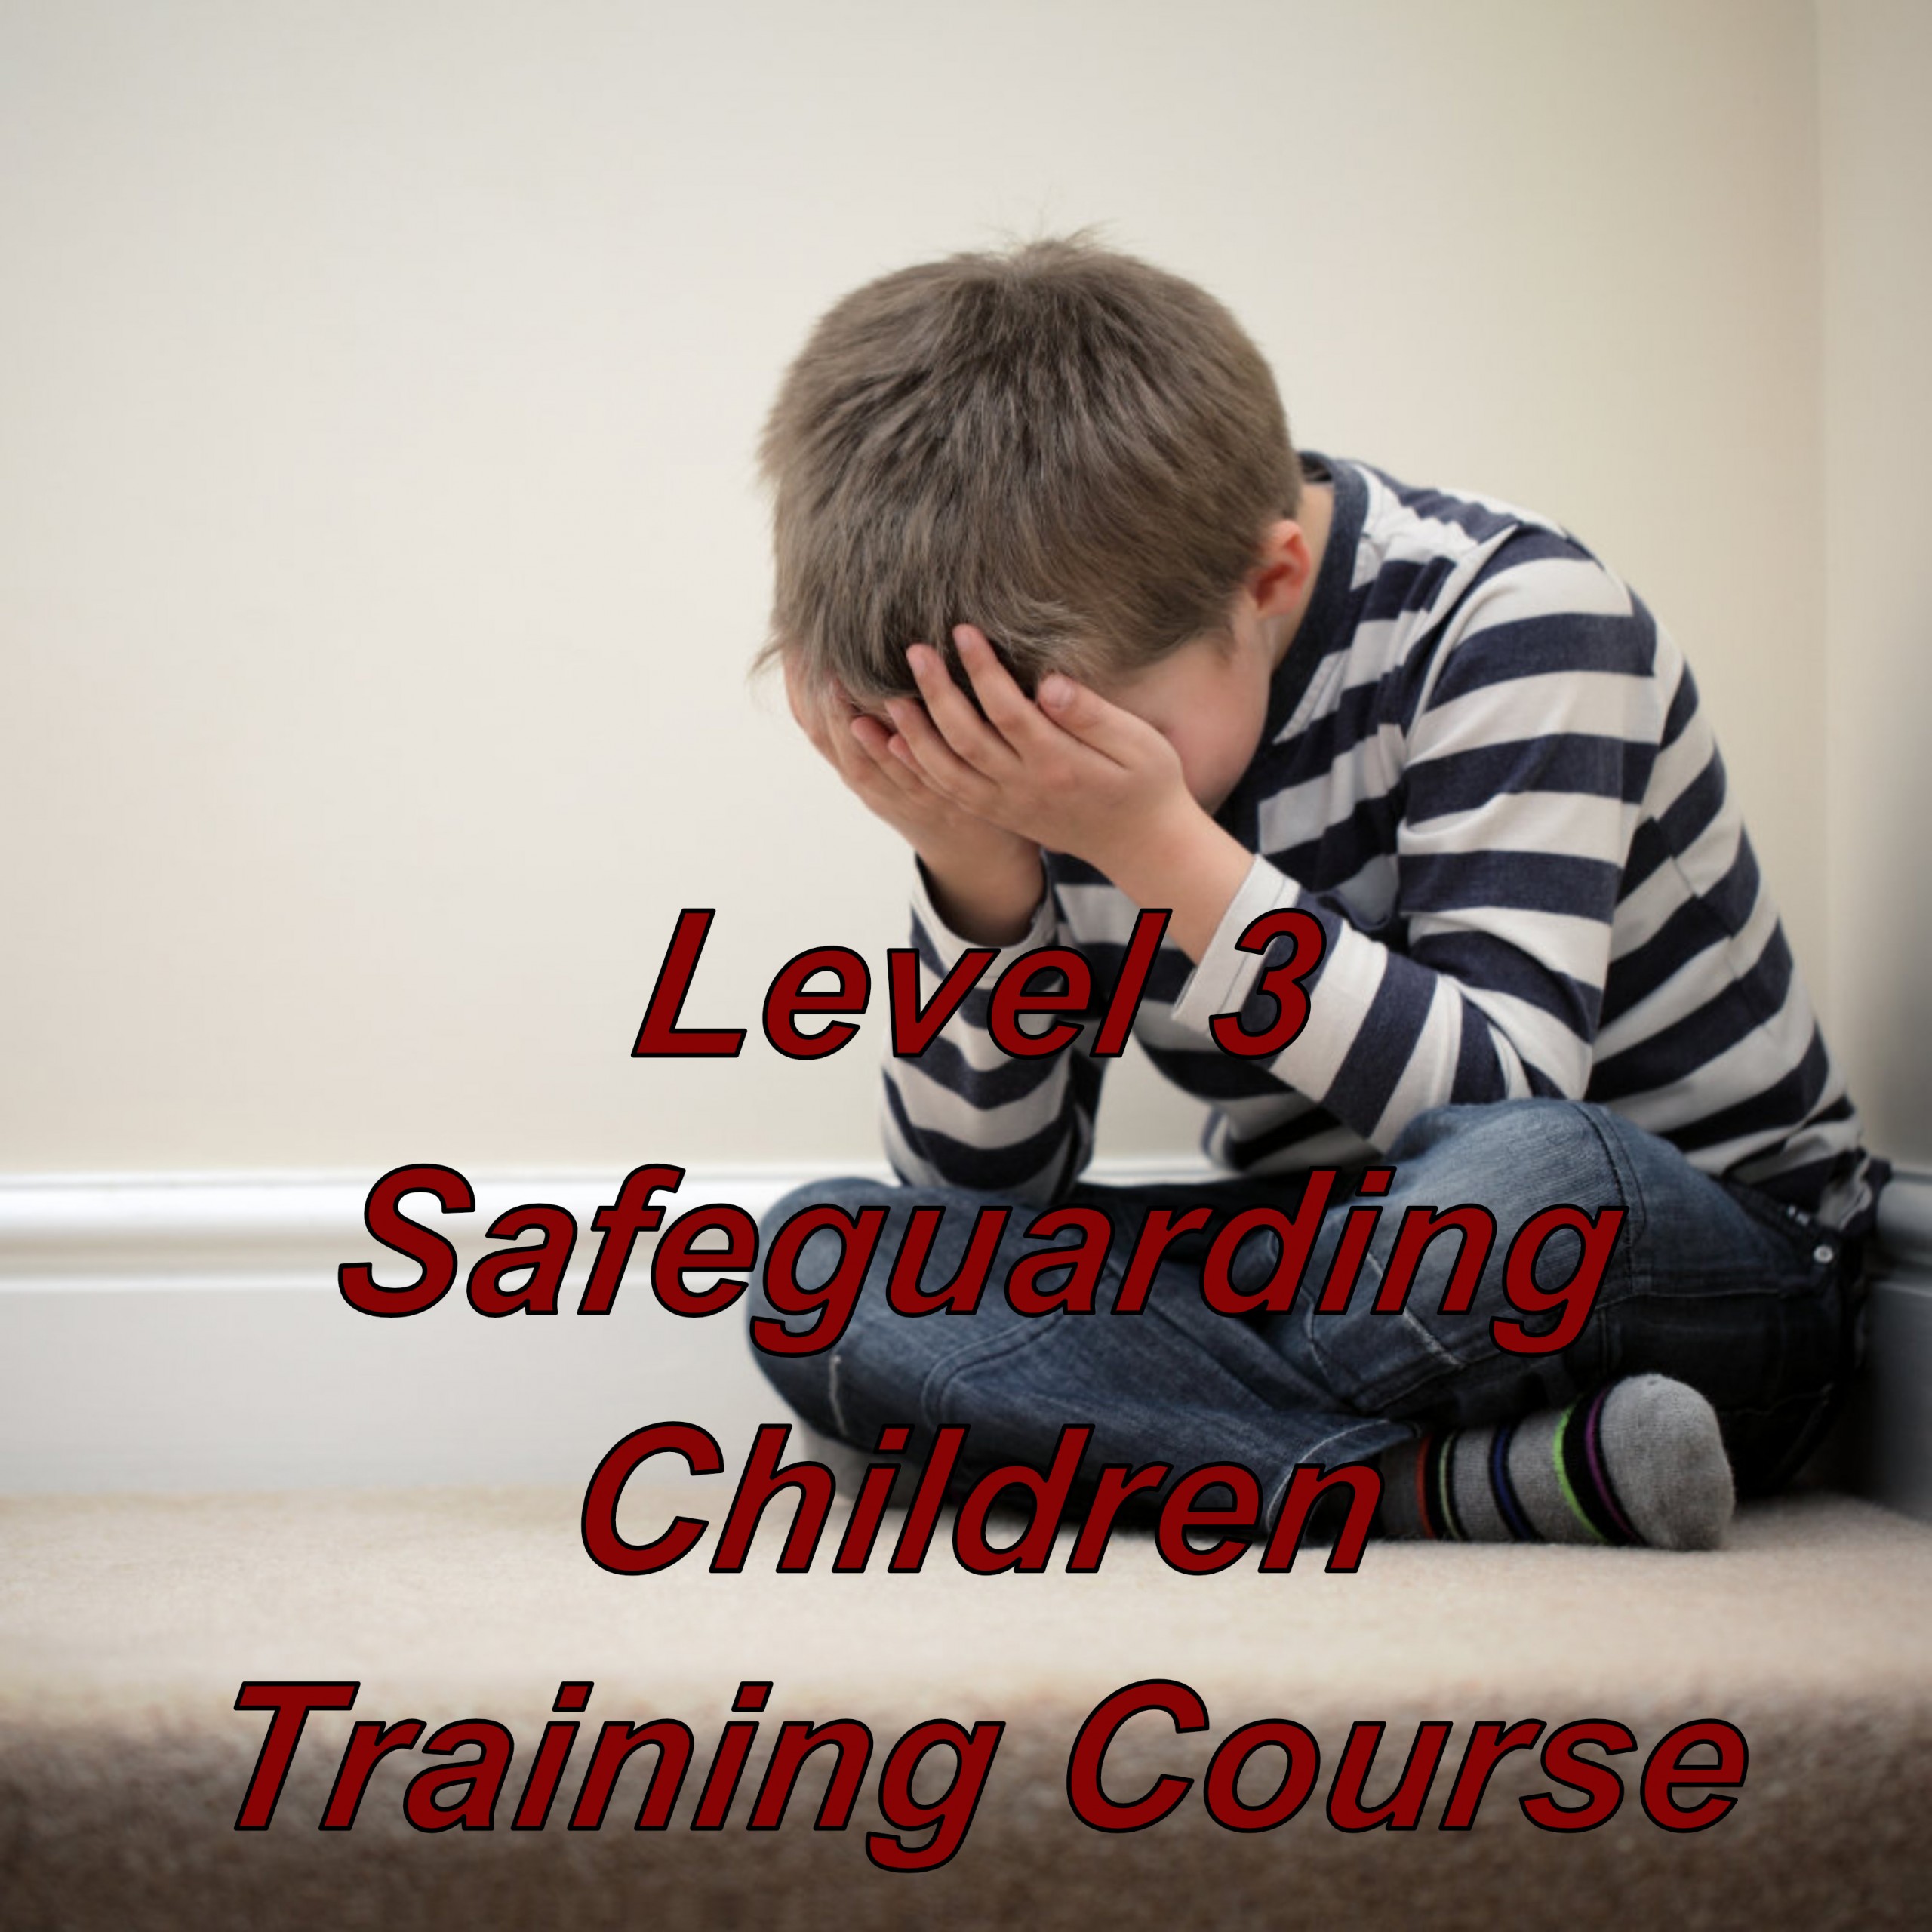 Level 3 safeguarding children training online for healthcare professionals, click here for additional information.